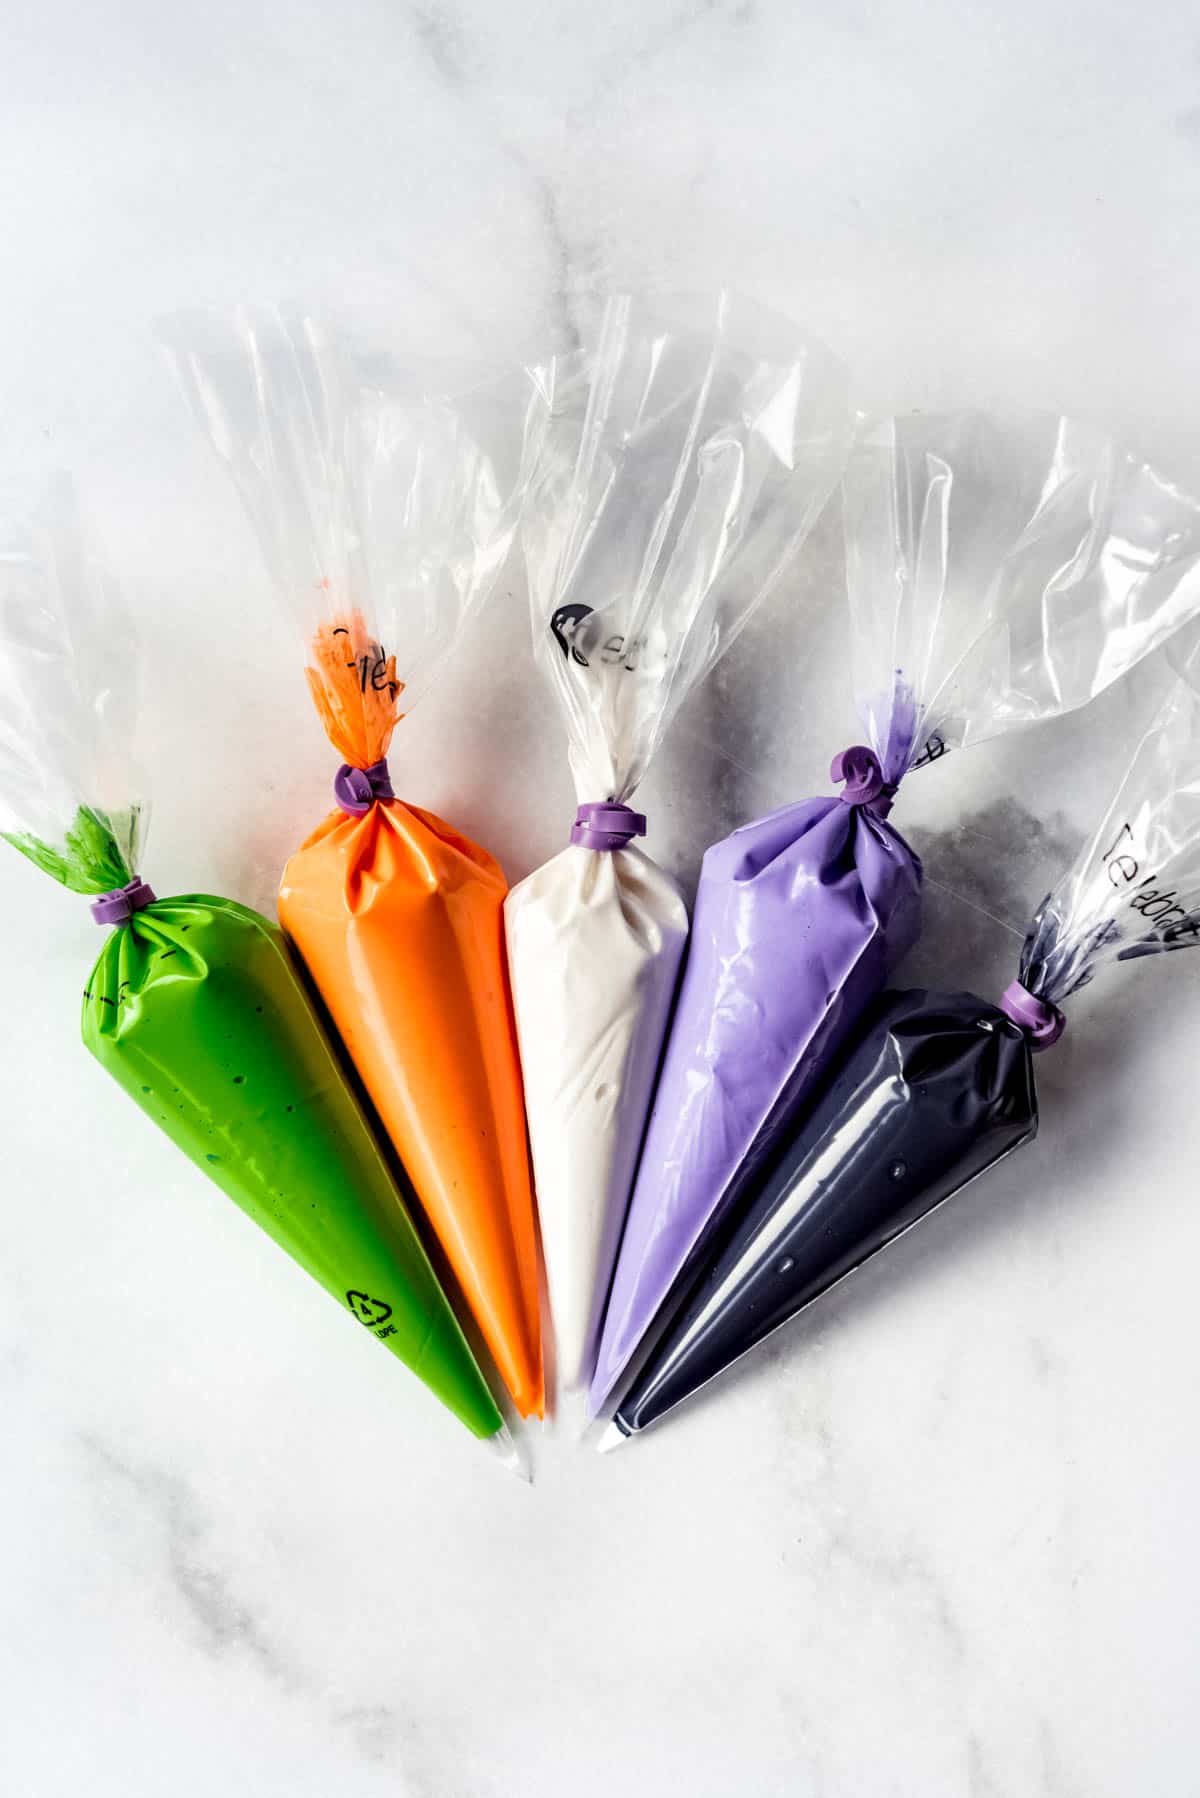 Give bags of royal icing in green, orange, white, purple and black.